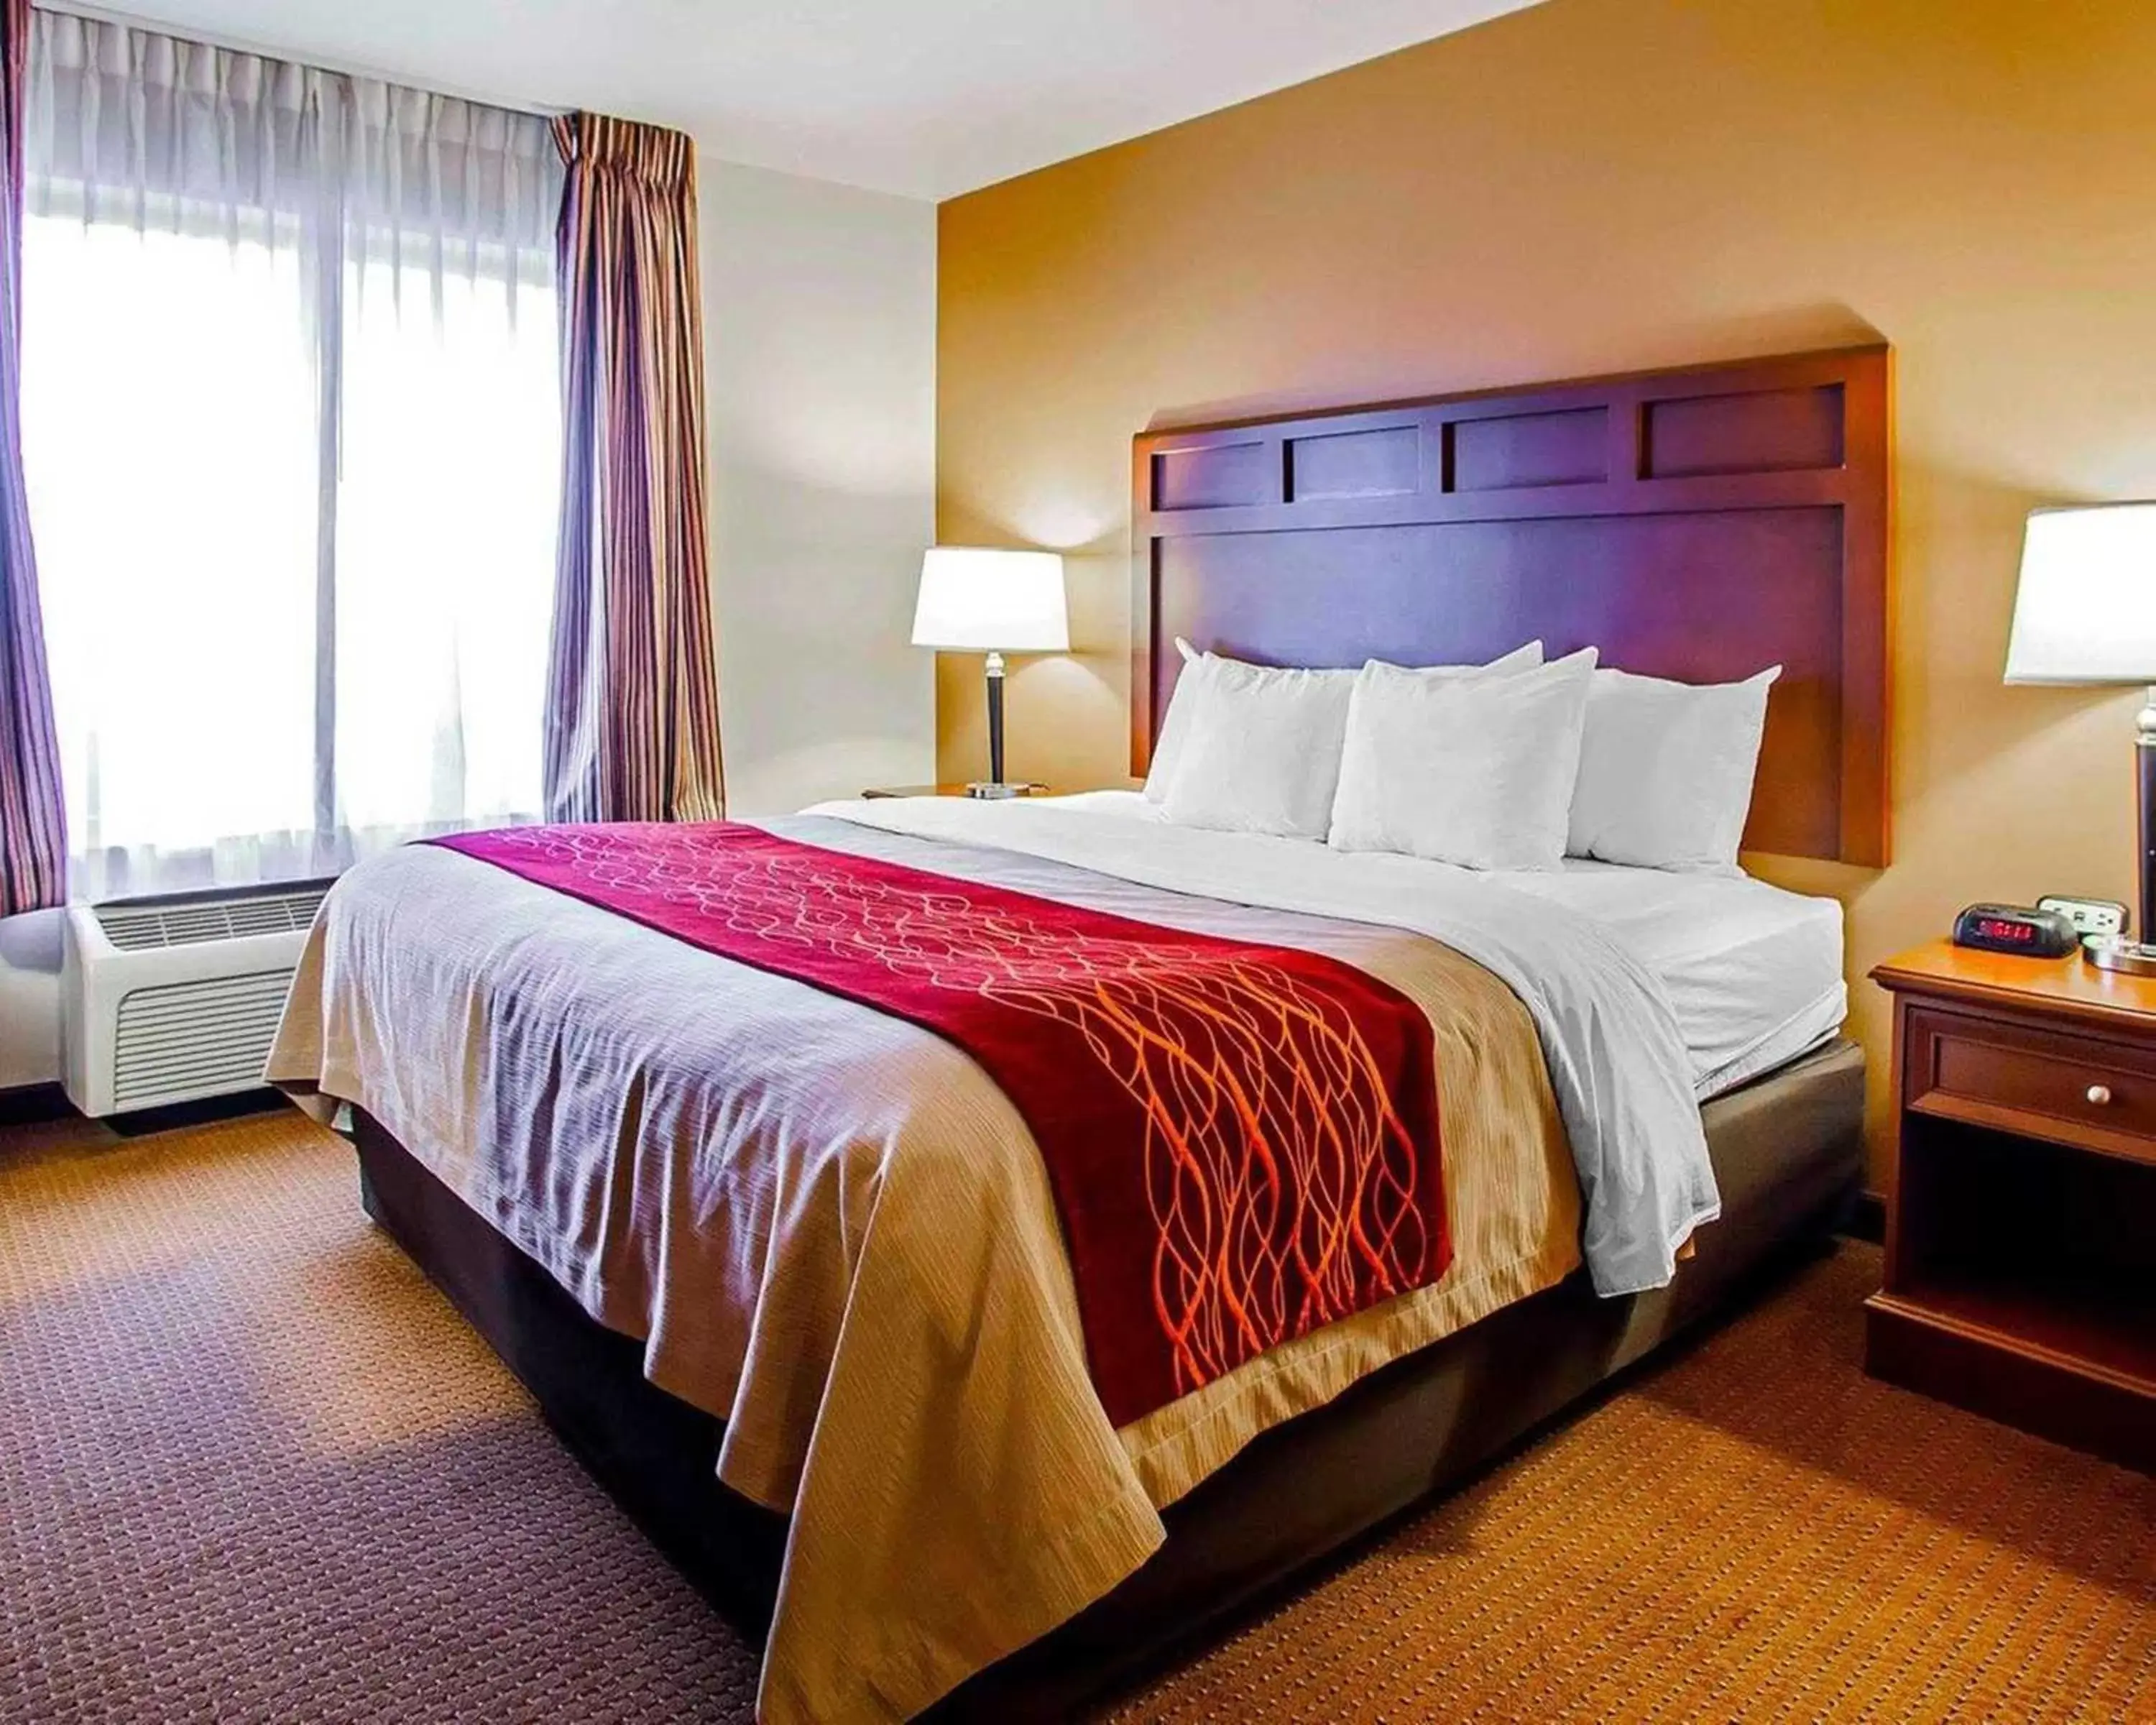 King Room - Non-Smoking in Comfort Inn & Suites Grinnell near I-80